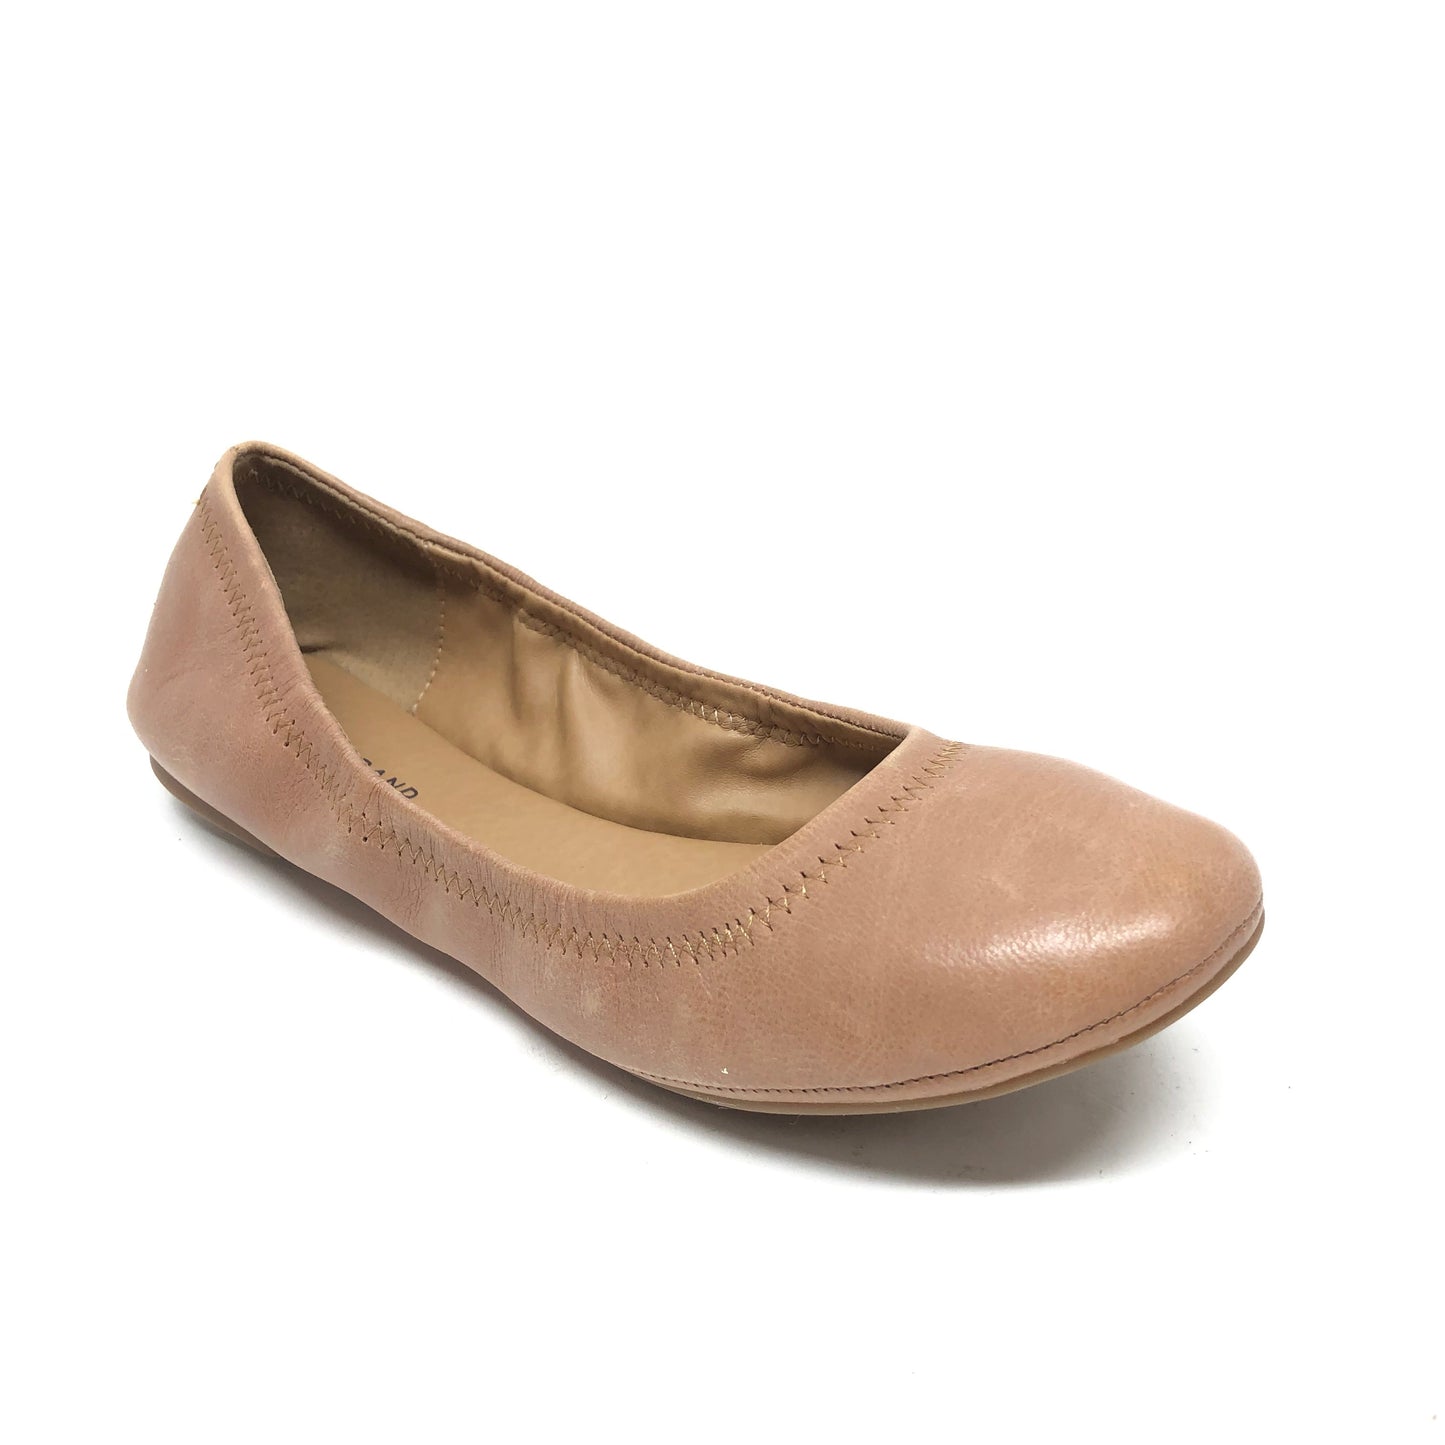 Tan Shoes Flats Lucky Brand, Size 7.5